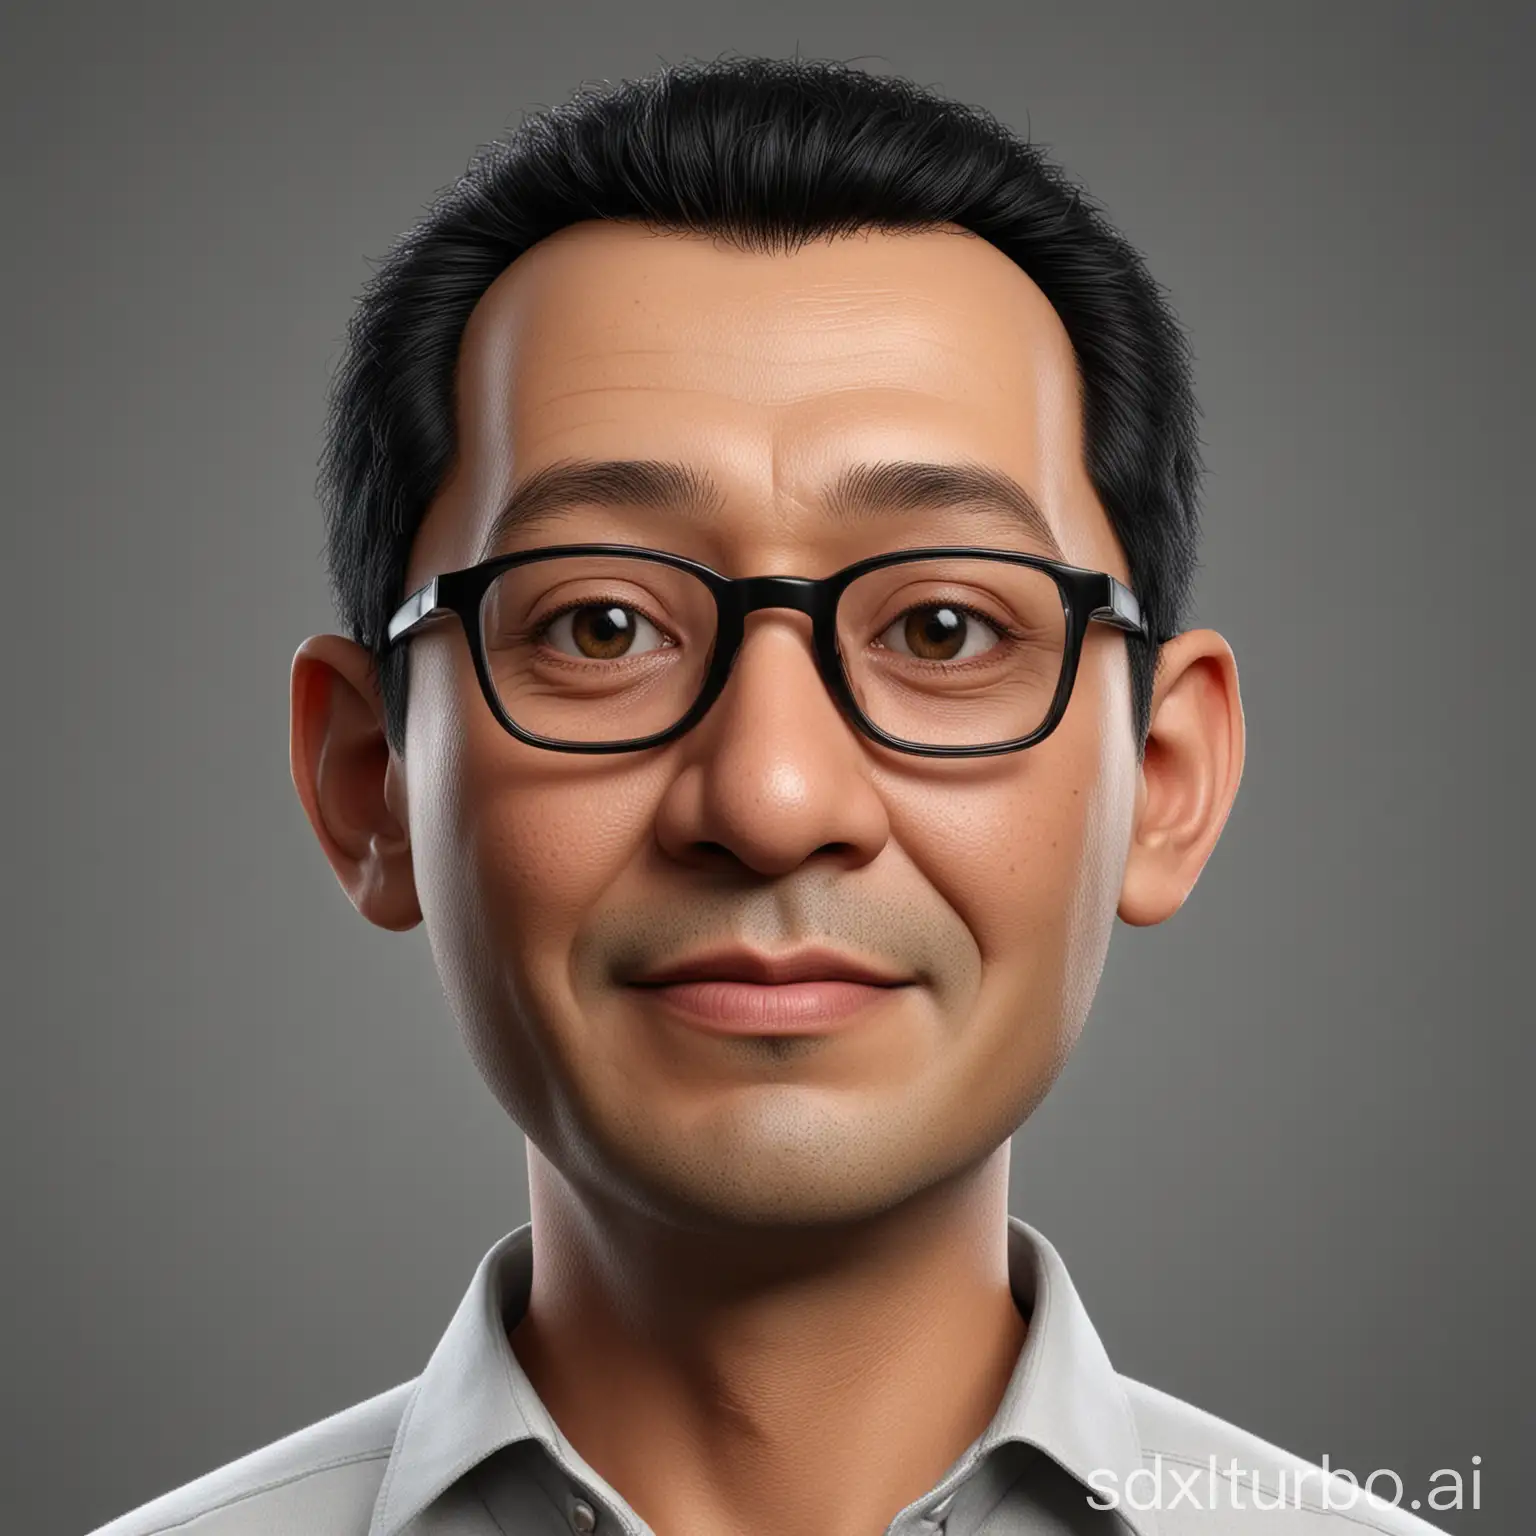 Hyperrealistic-3D-Cartoon-Portrait-of-a-Handsome-Indonesian-Man-in-White-Shirt-with-Glasses